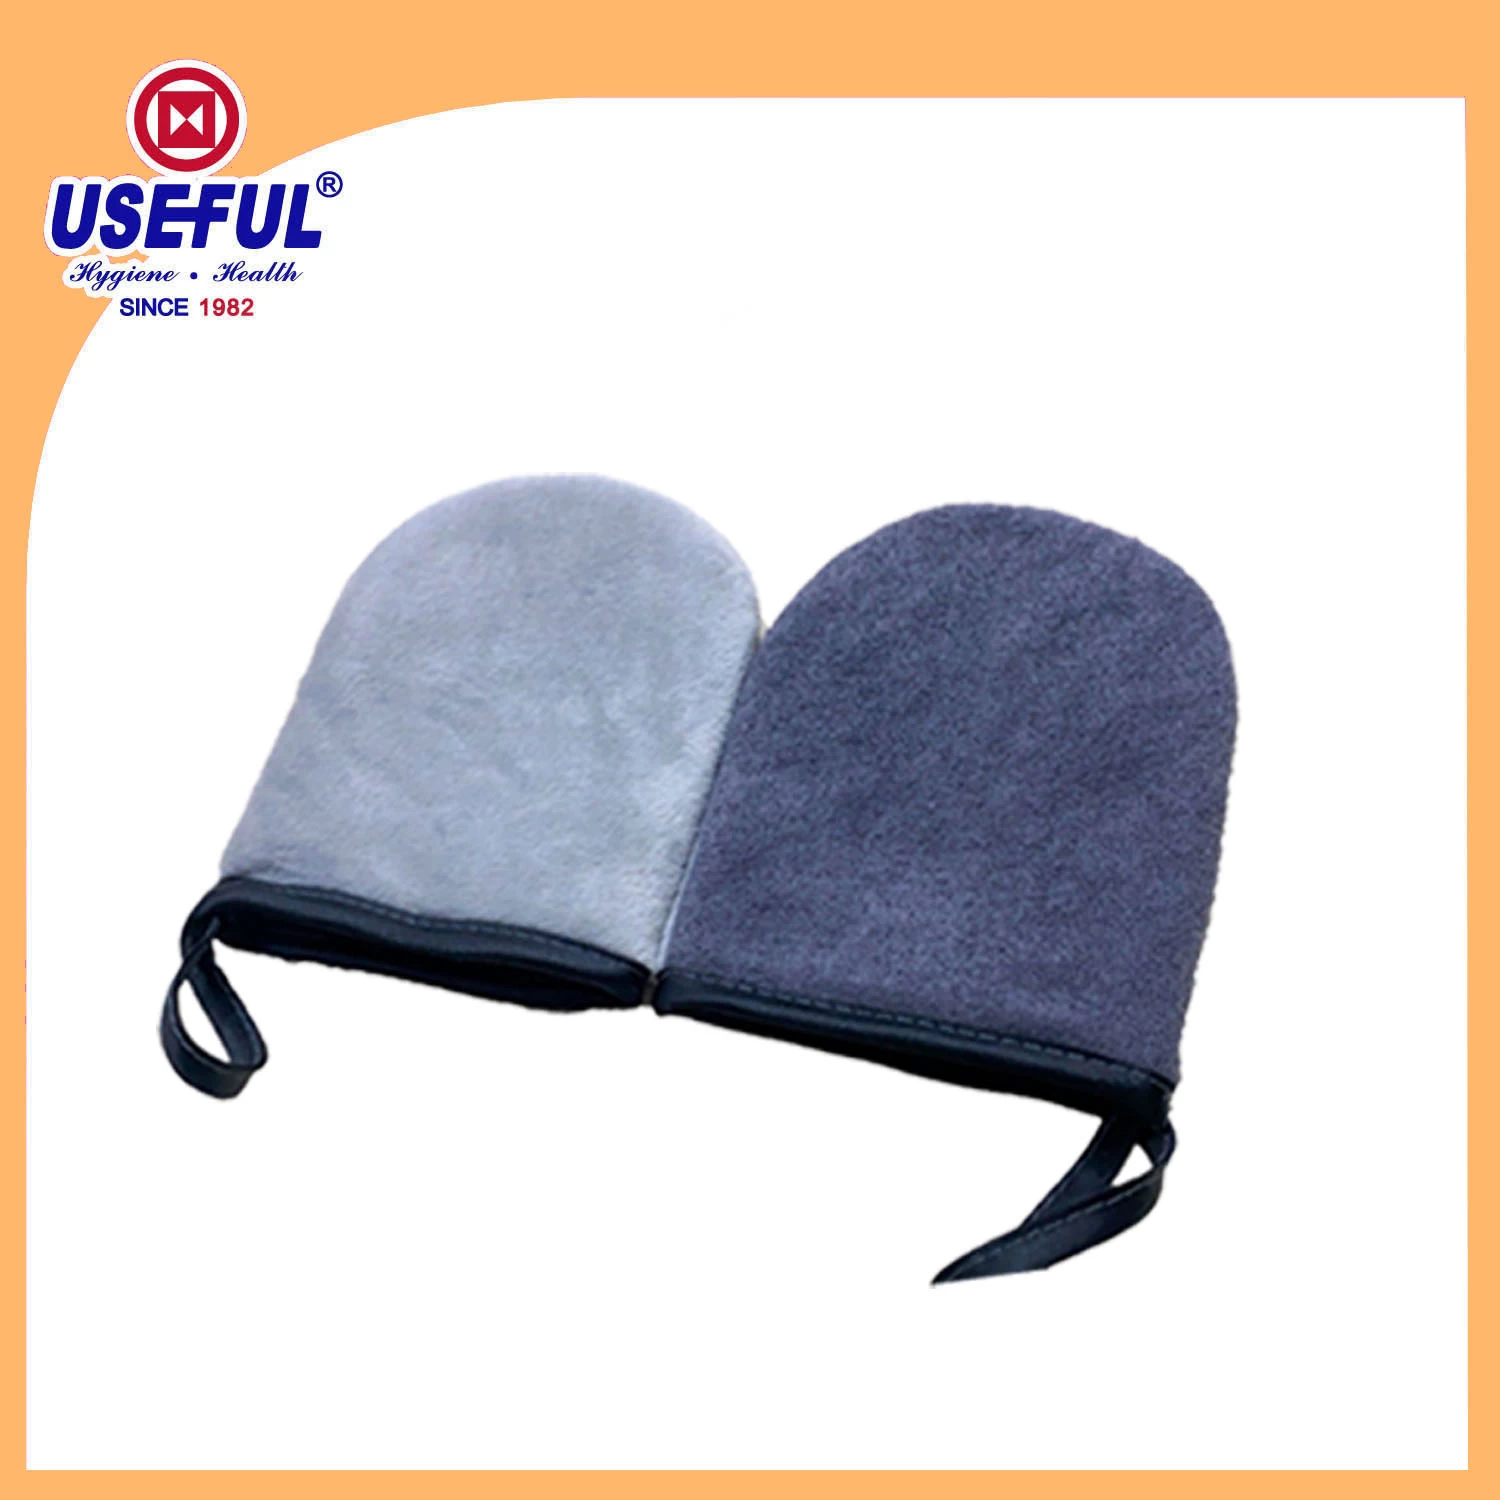 Reusable Makeup Remover Pad - glove style